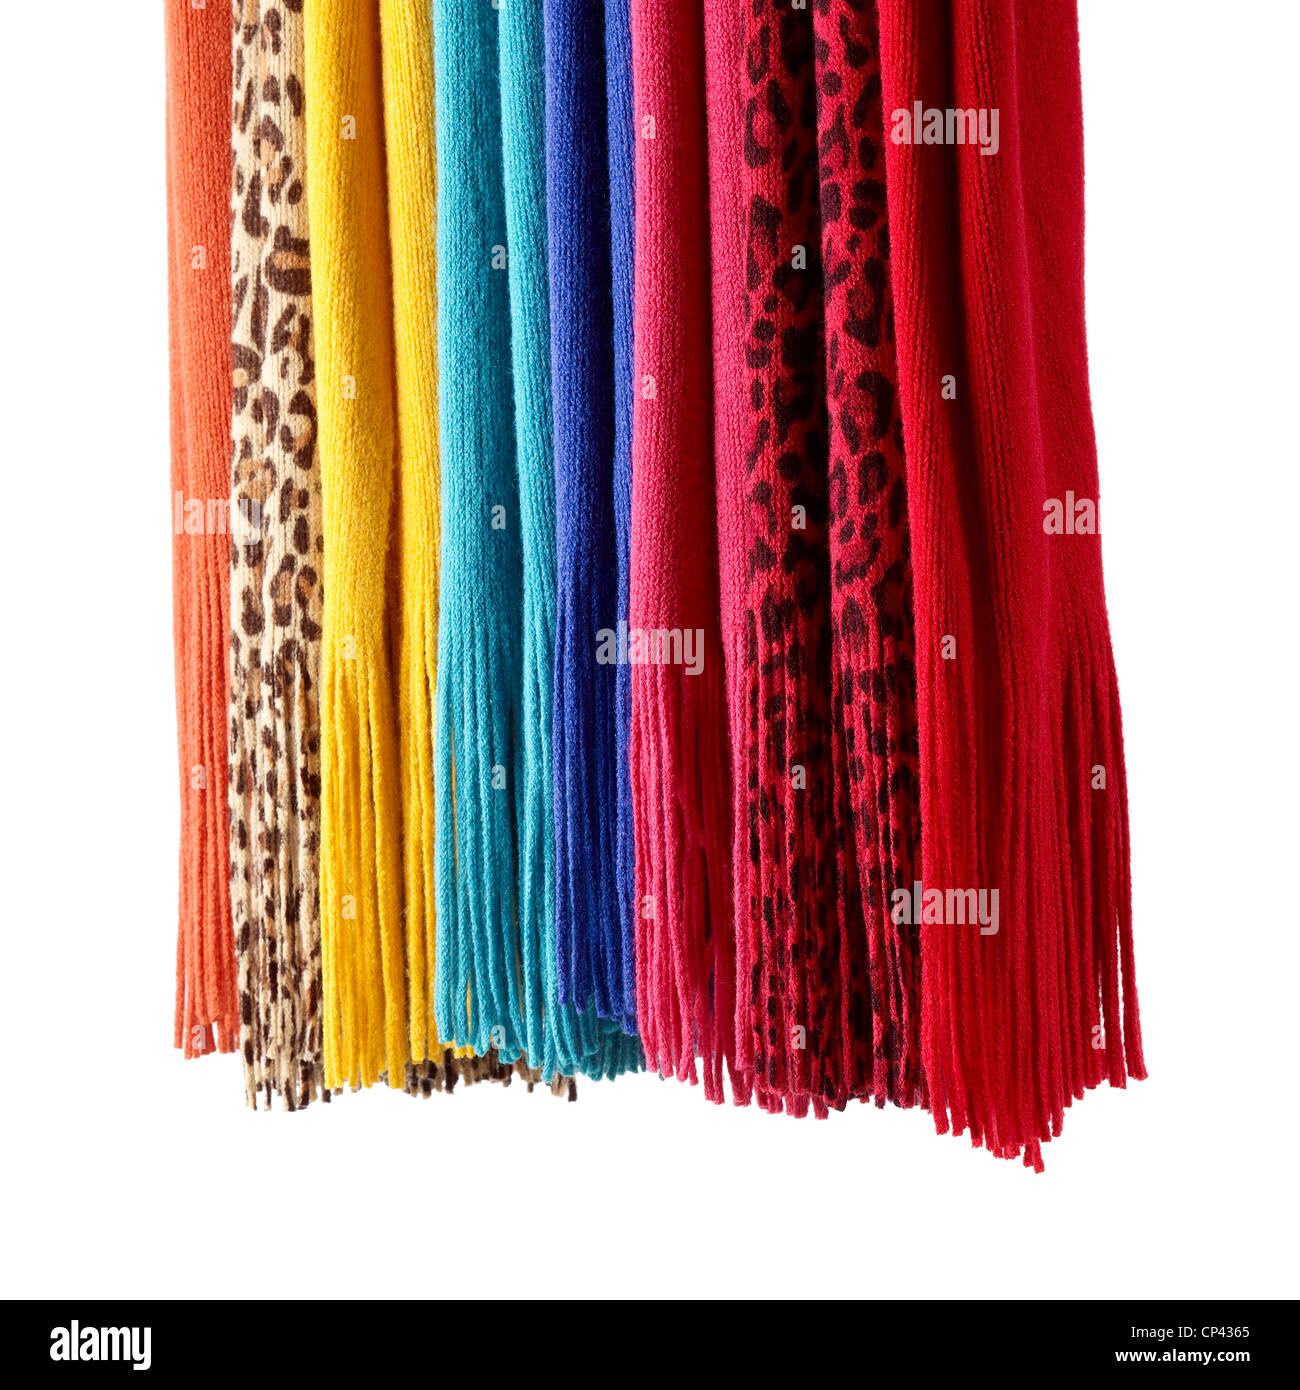 A still life shot of colourful wool scarves lined up Stock Photo